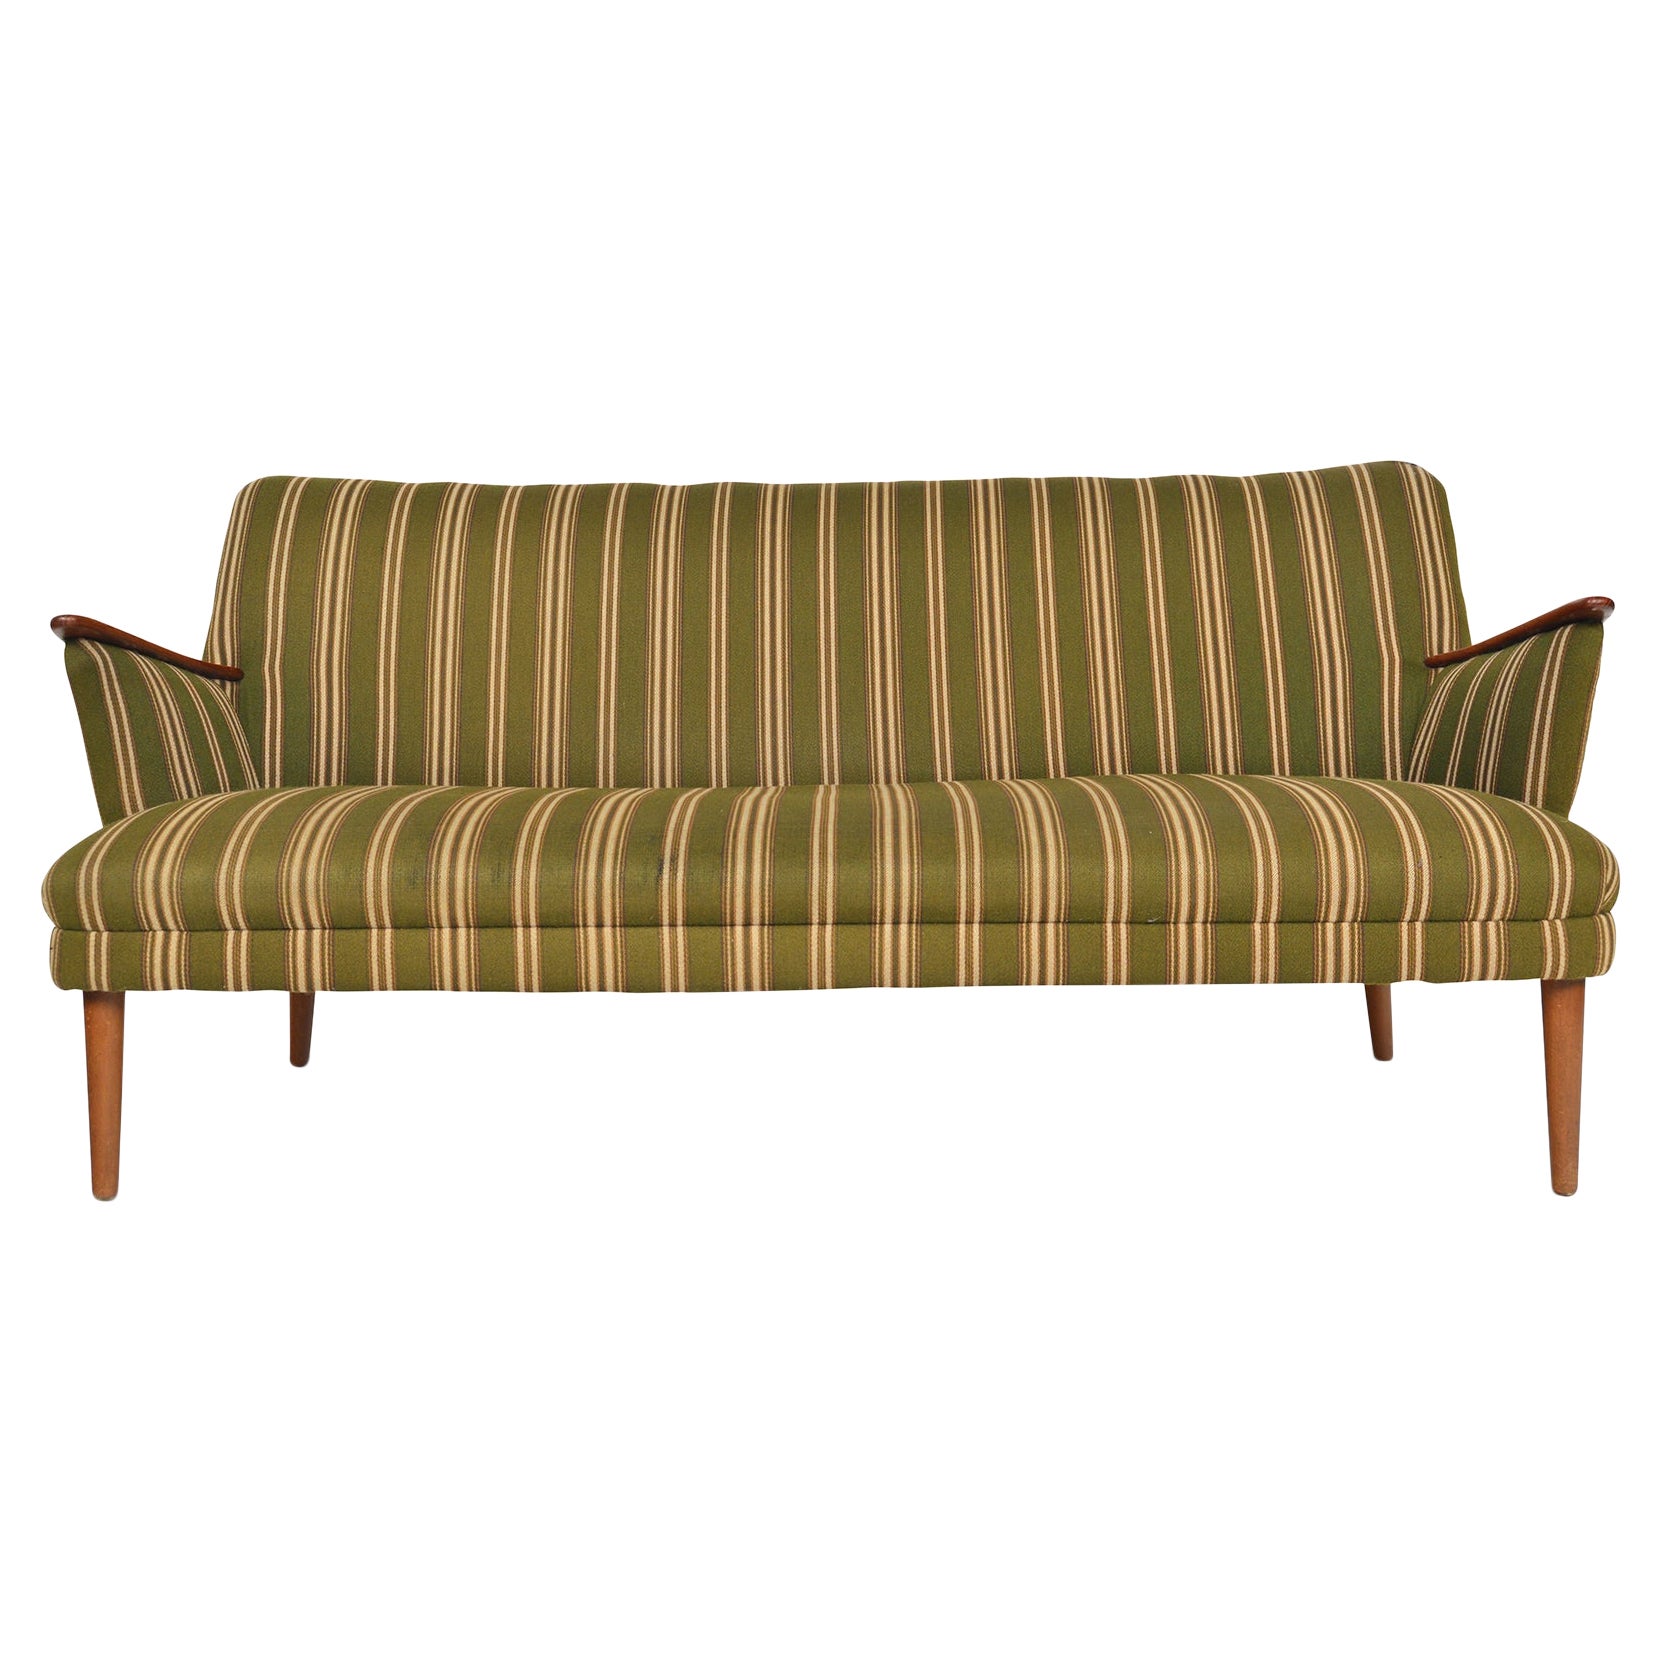 Danish Modern Sofa in Green Striped Wool with Teak Paws For Sale at 1stDibs